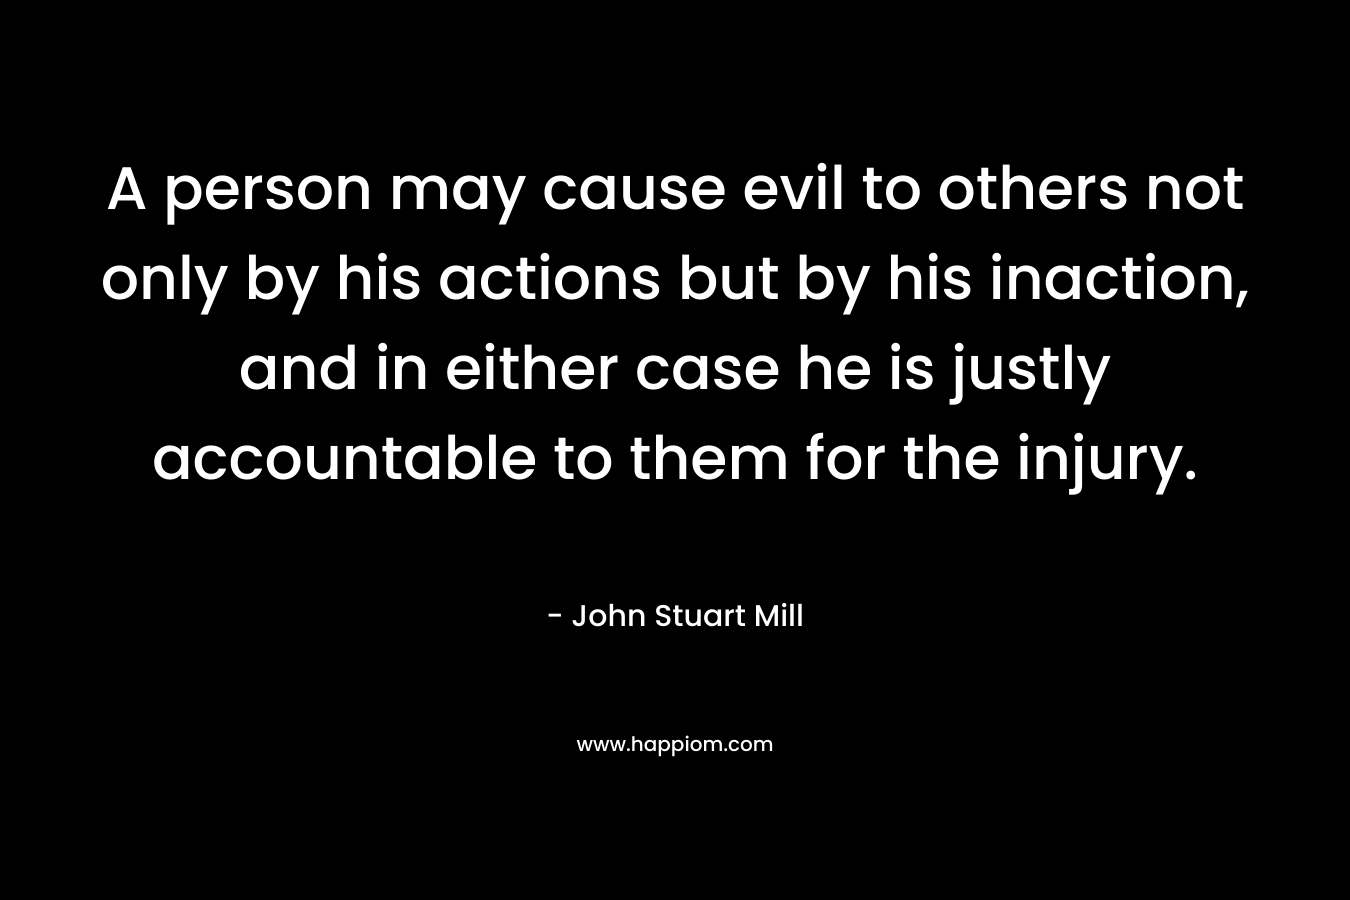 A person may cause evil to others not only by his actions but by his inaction, and in either case he is justly accountable to them for the injury.